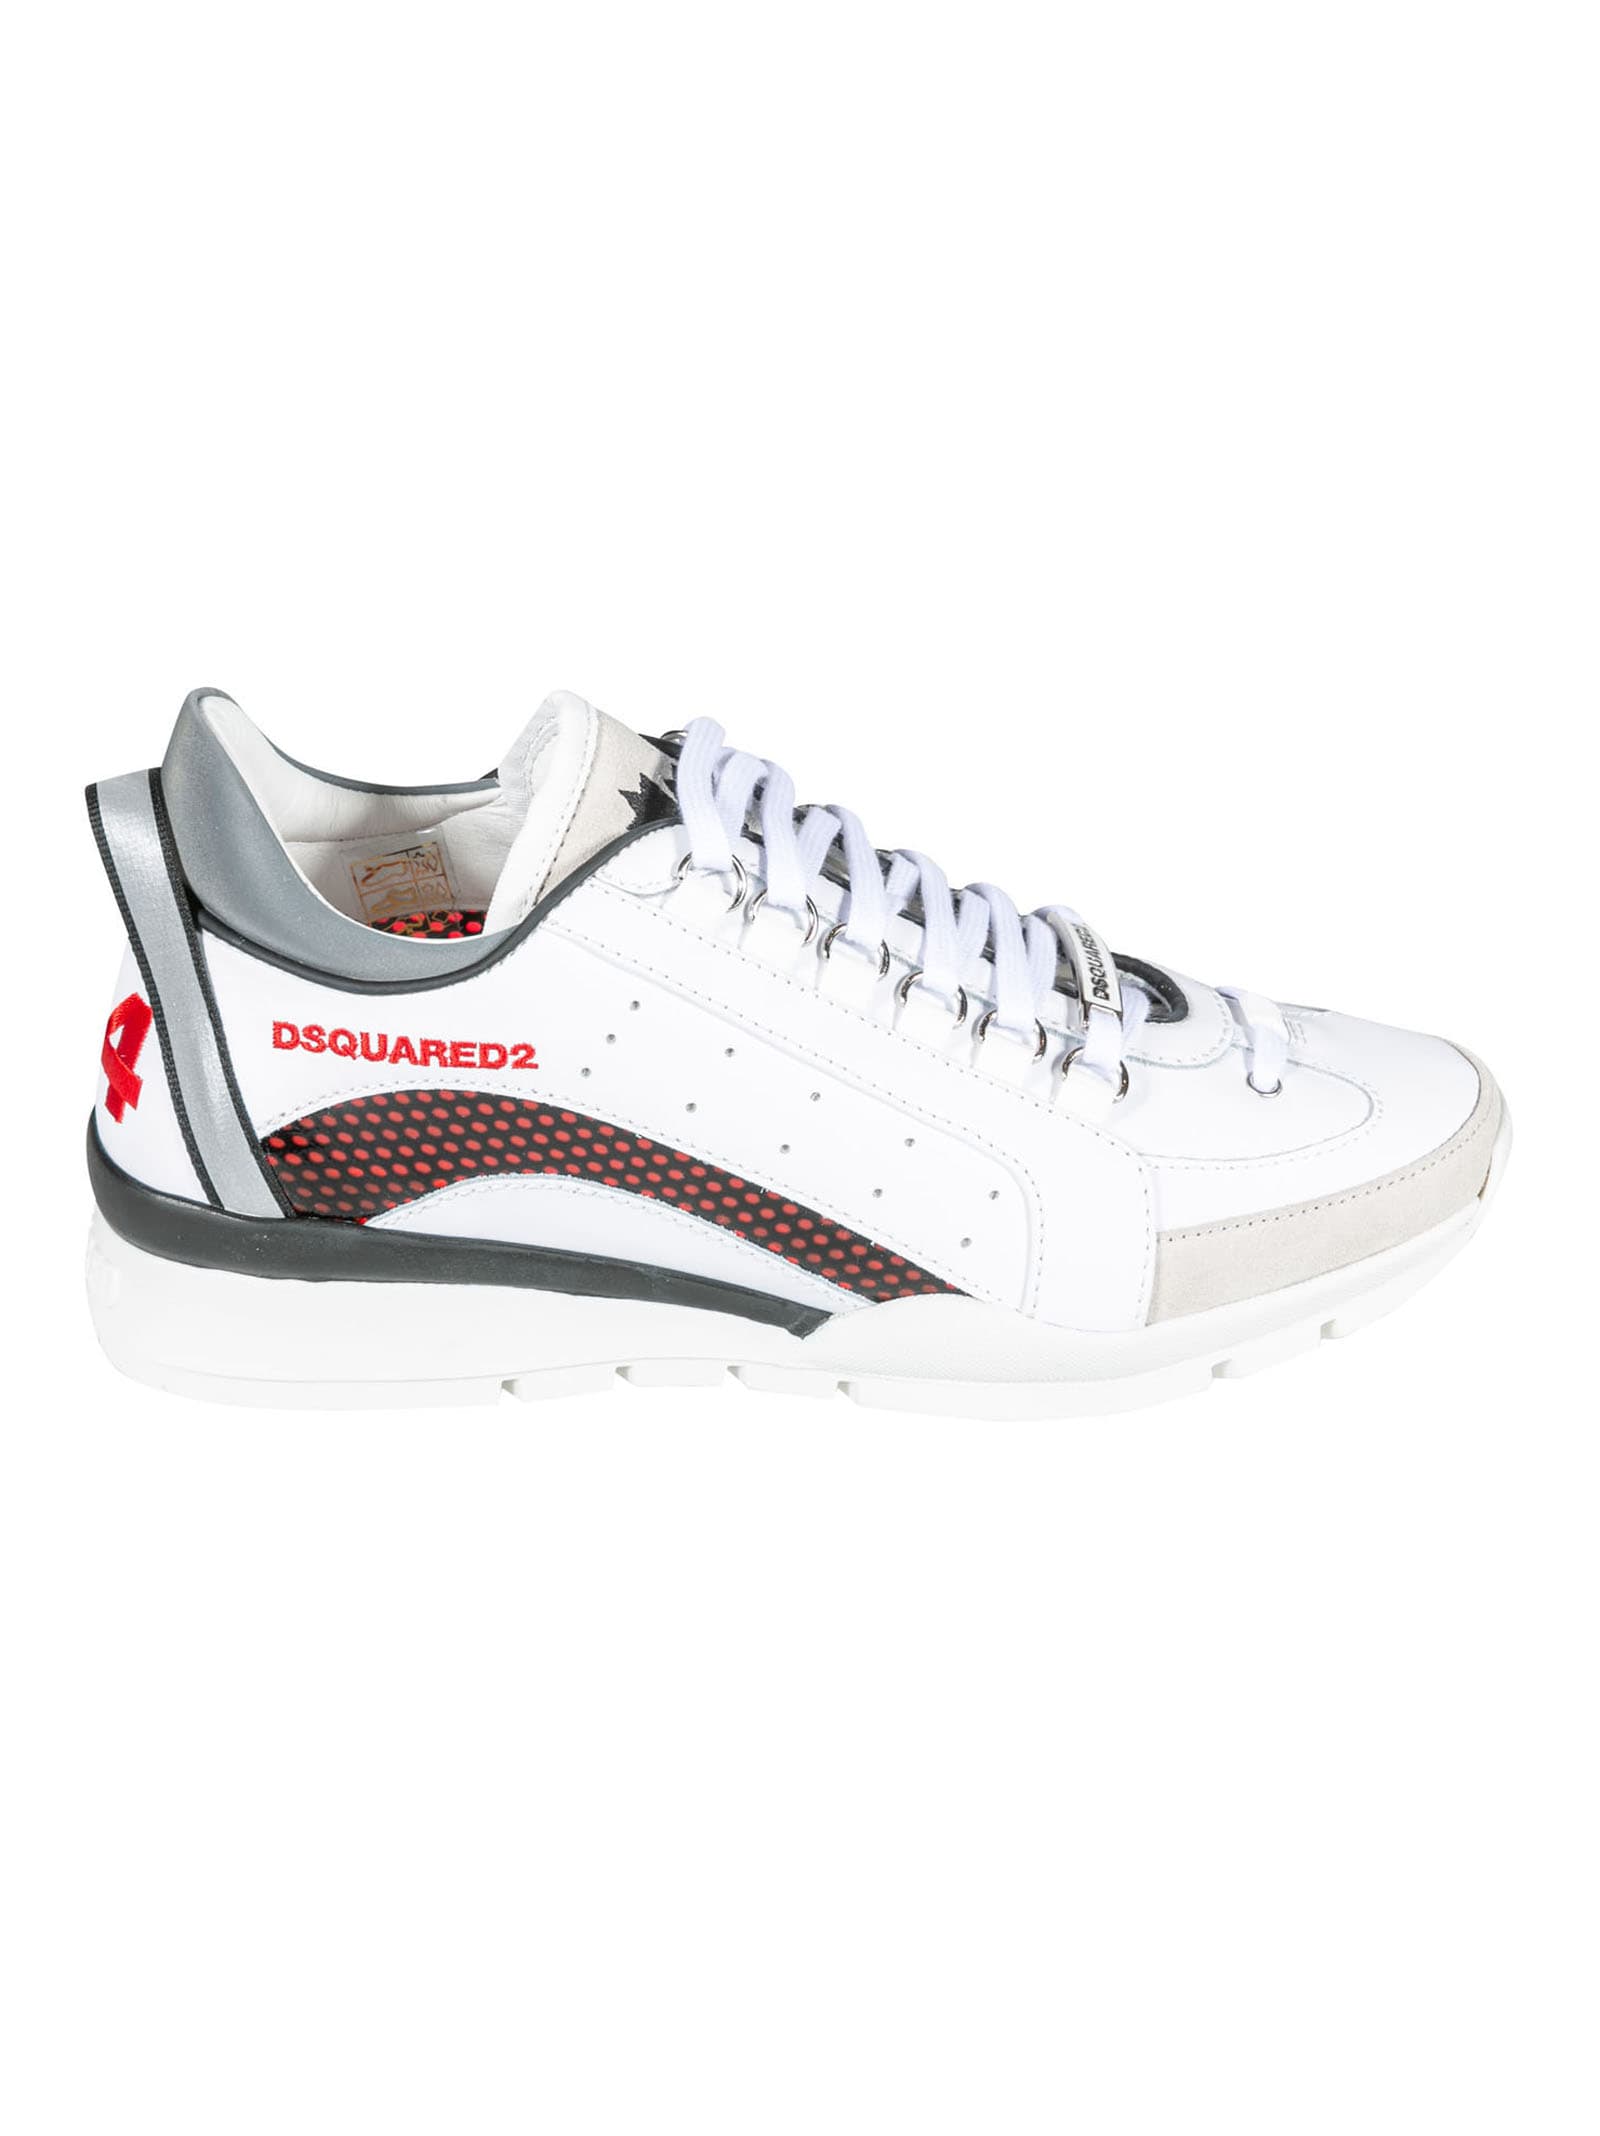 DSQUARED2 SIDE LOGO PERFORATED SNEAKERS,SNM0153 30801660-M1747